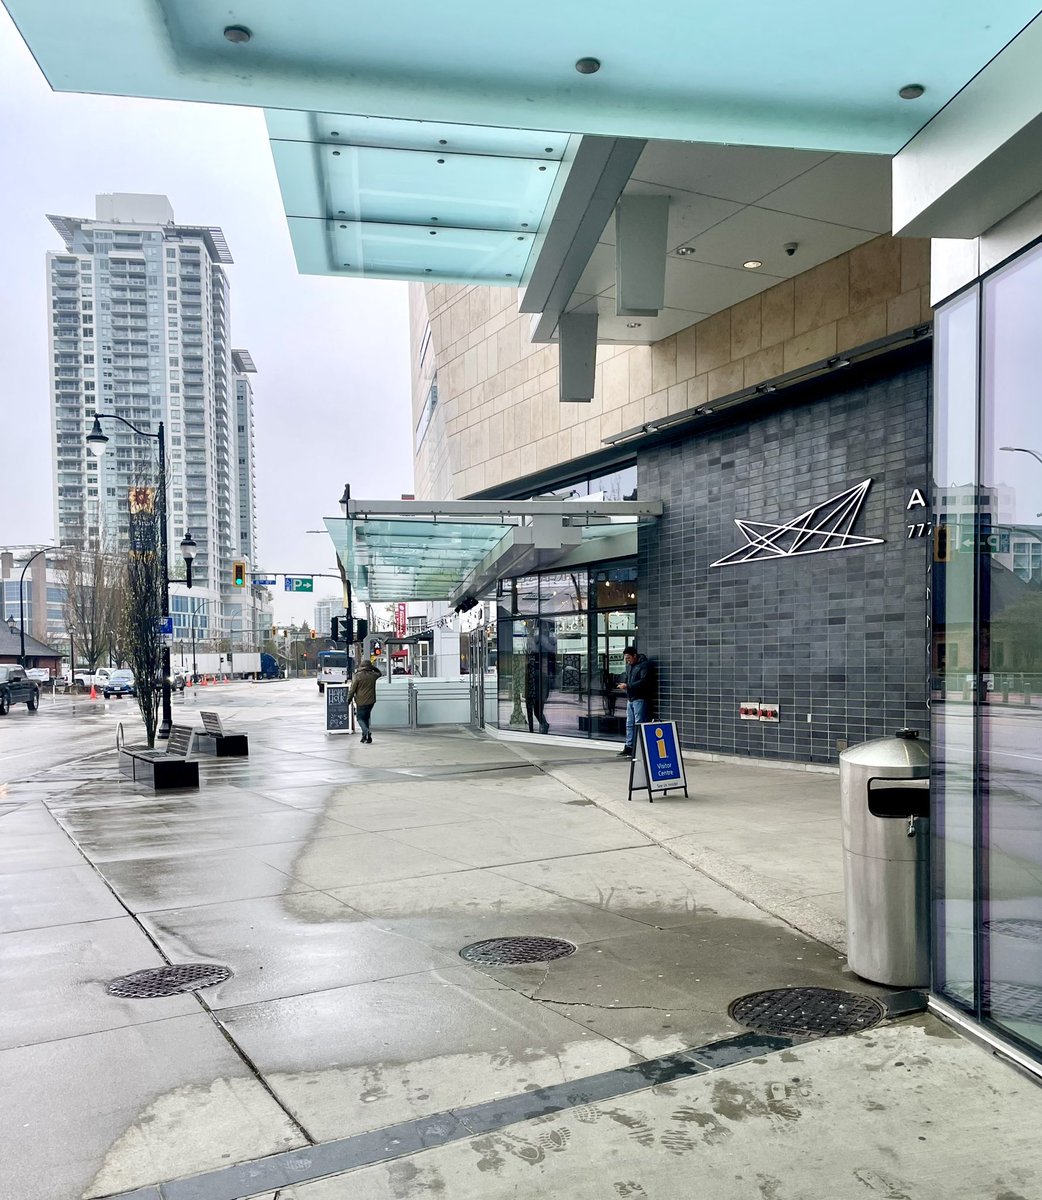 The wet spots on the sidewalk next to this building show how some architect failed to design a building that could have had continuous weather protection for pedestrians walking along the building frontage. It would have been easy to overlap canopies. #architecture #urbandesign